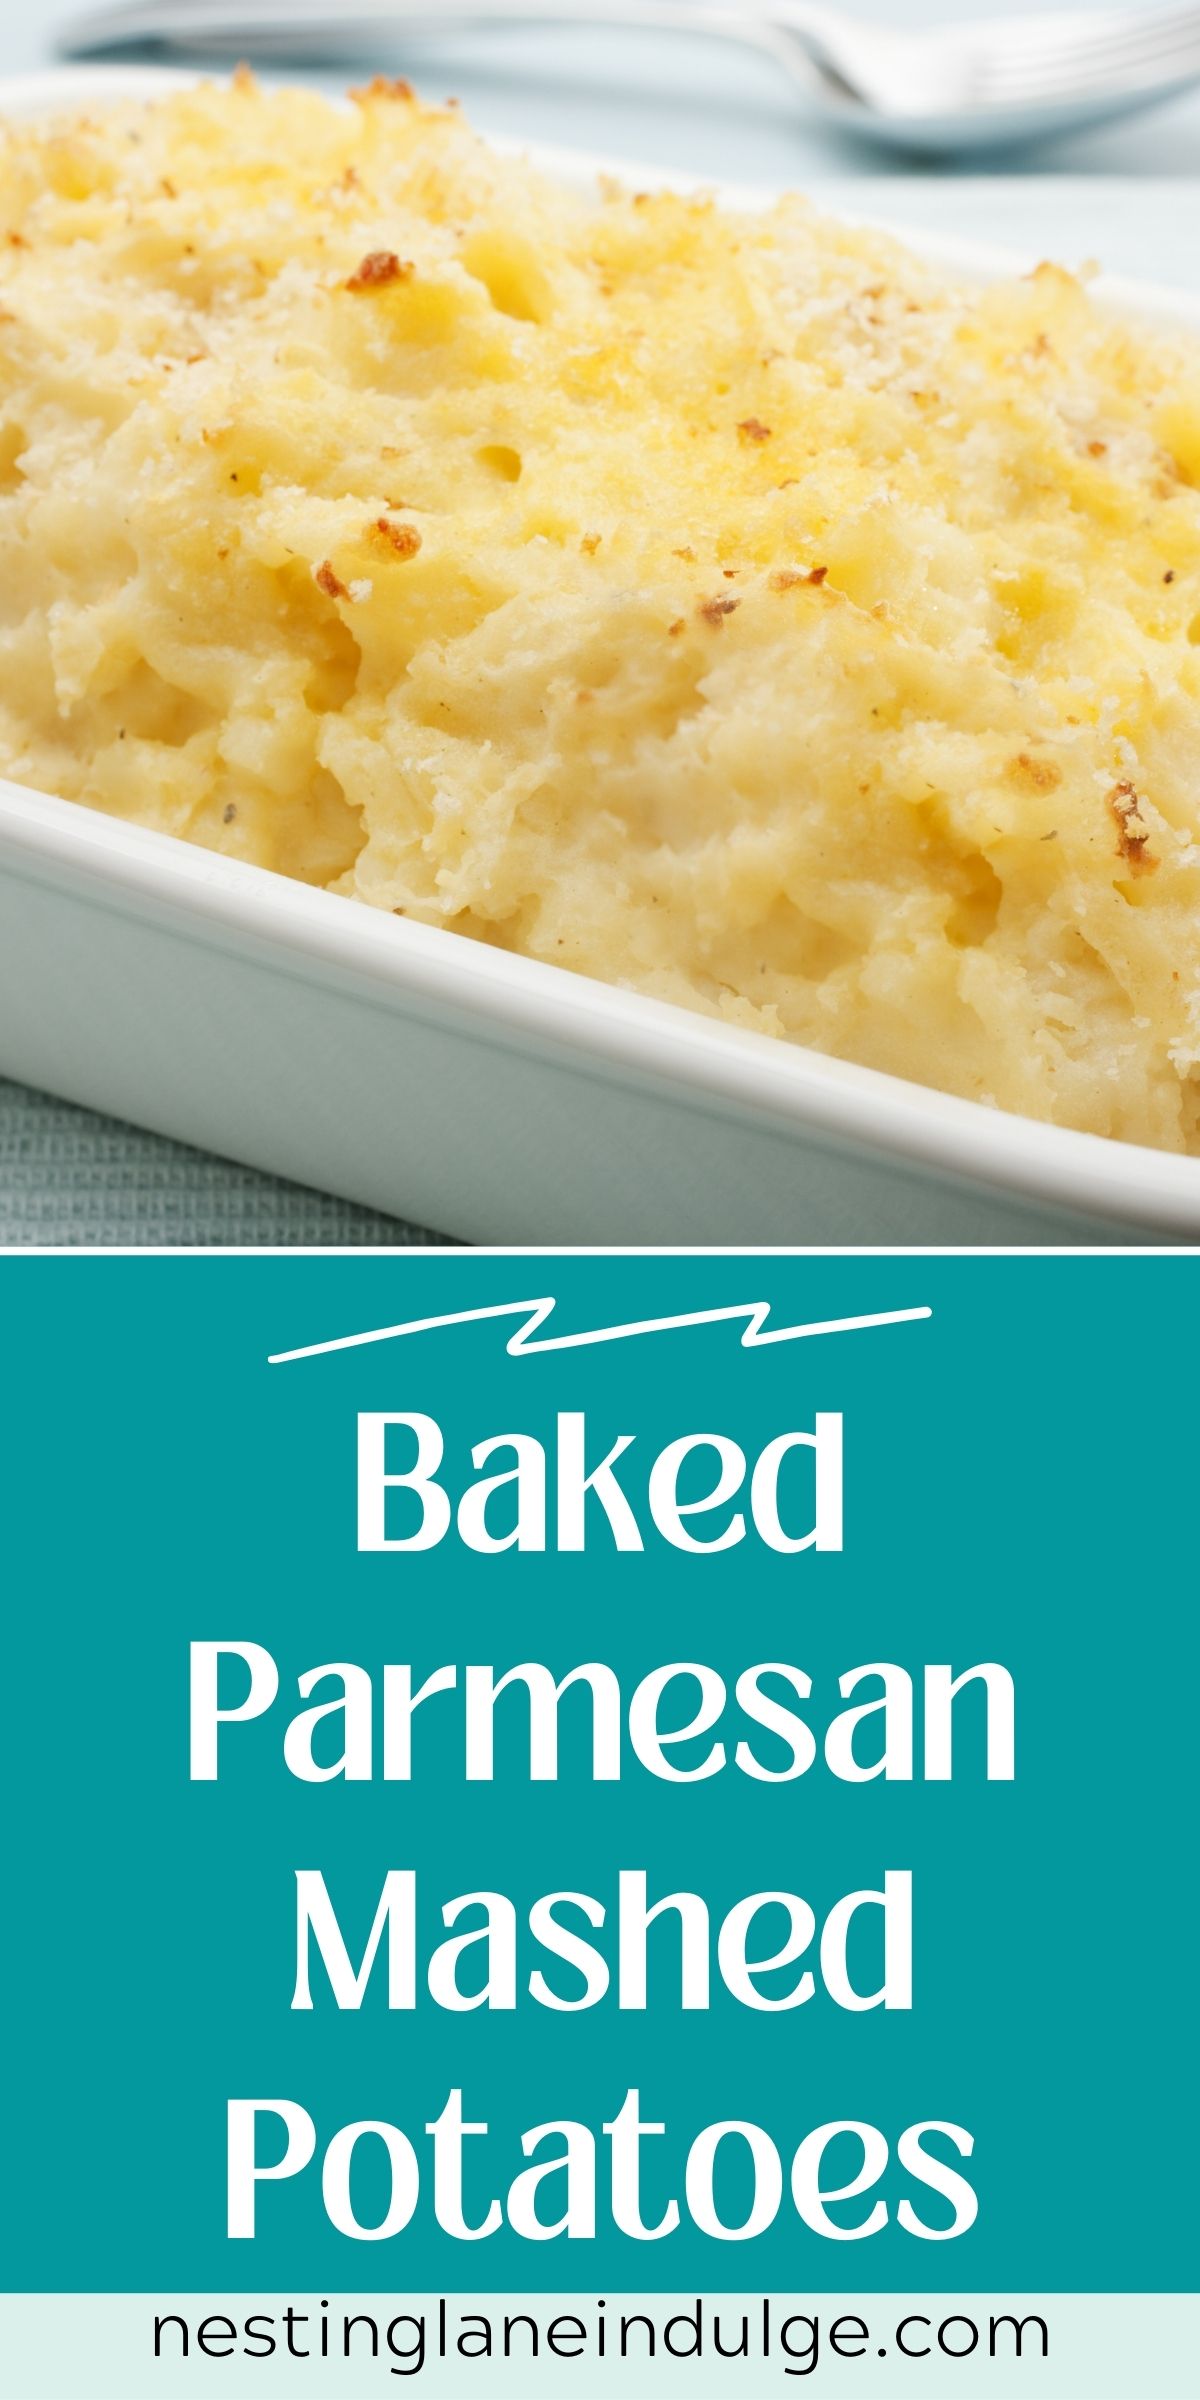 Graphic for Pinterest of Baked Parmesan Mashed Potatoes Recipe.